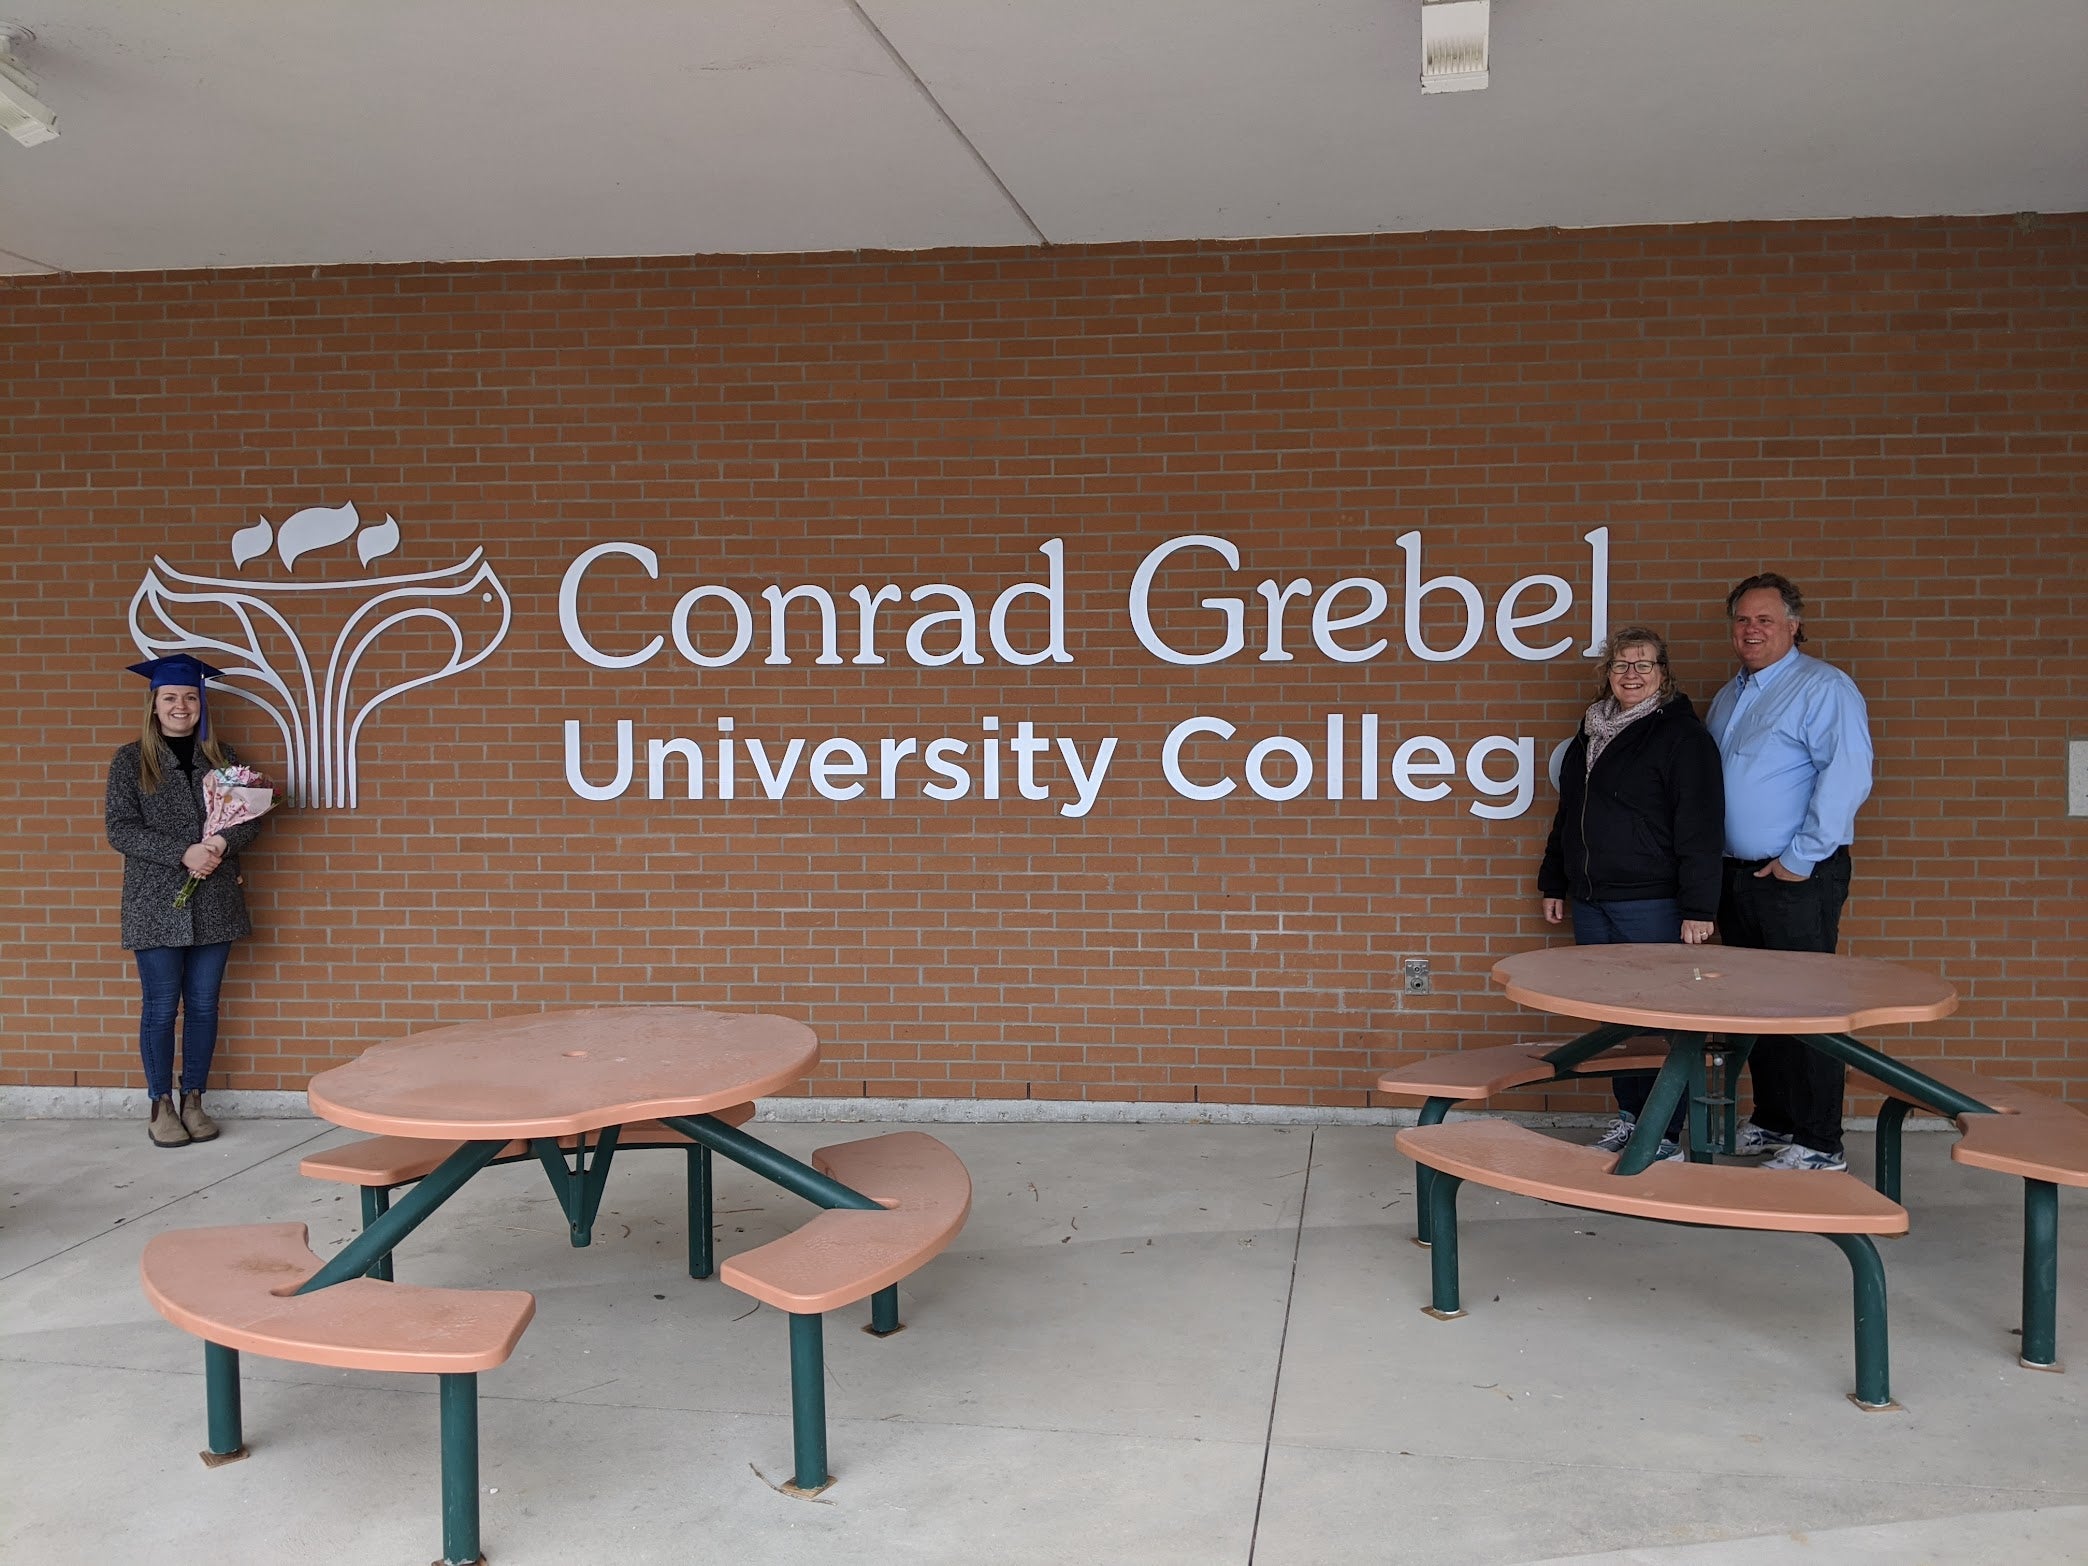 Hannah, wearing a grad cap, stands to the right of the Grebel sign, with Paul and Dolores standing on left, smiling for the camera